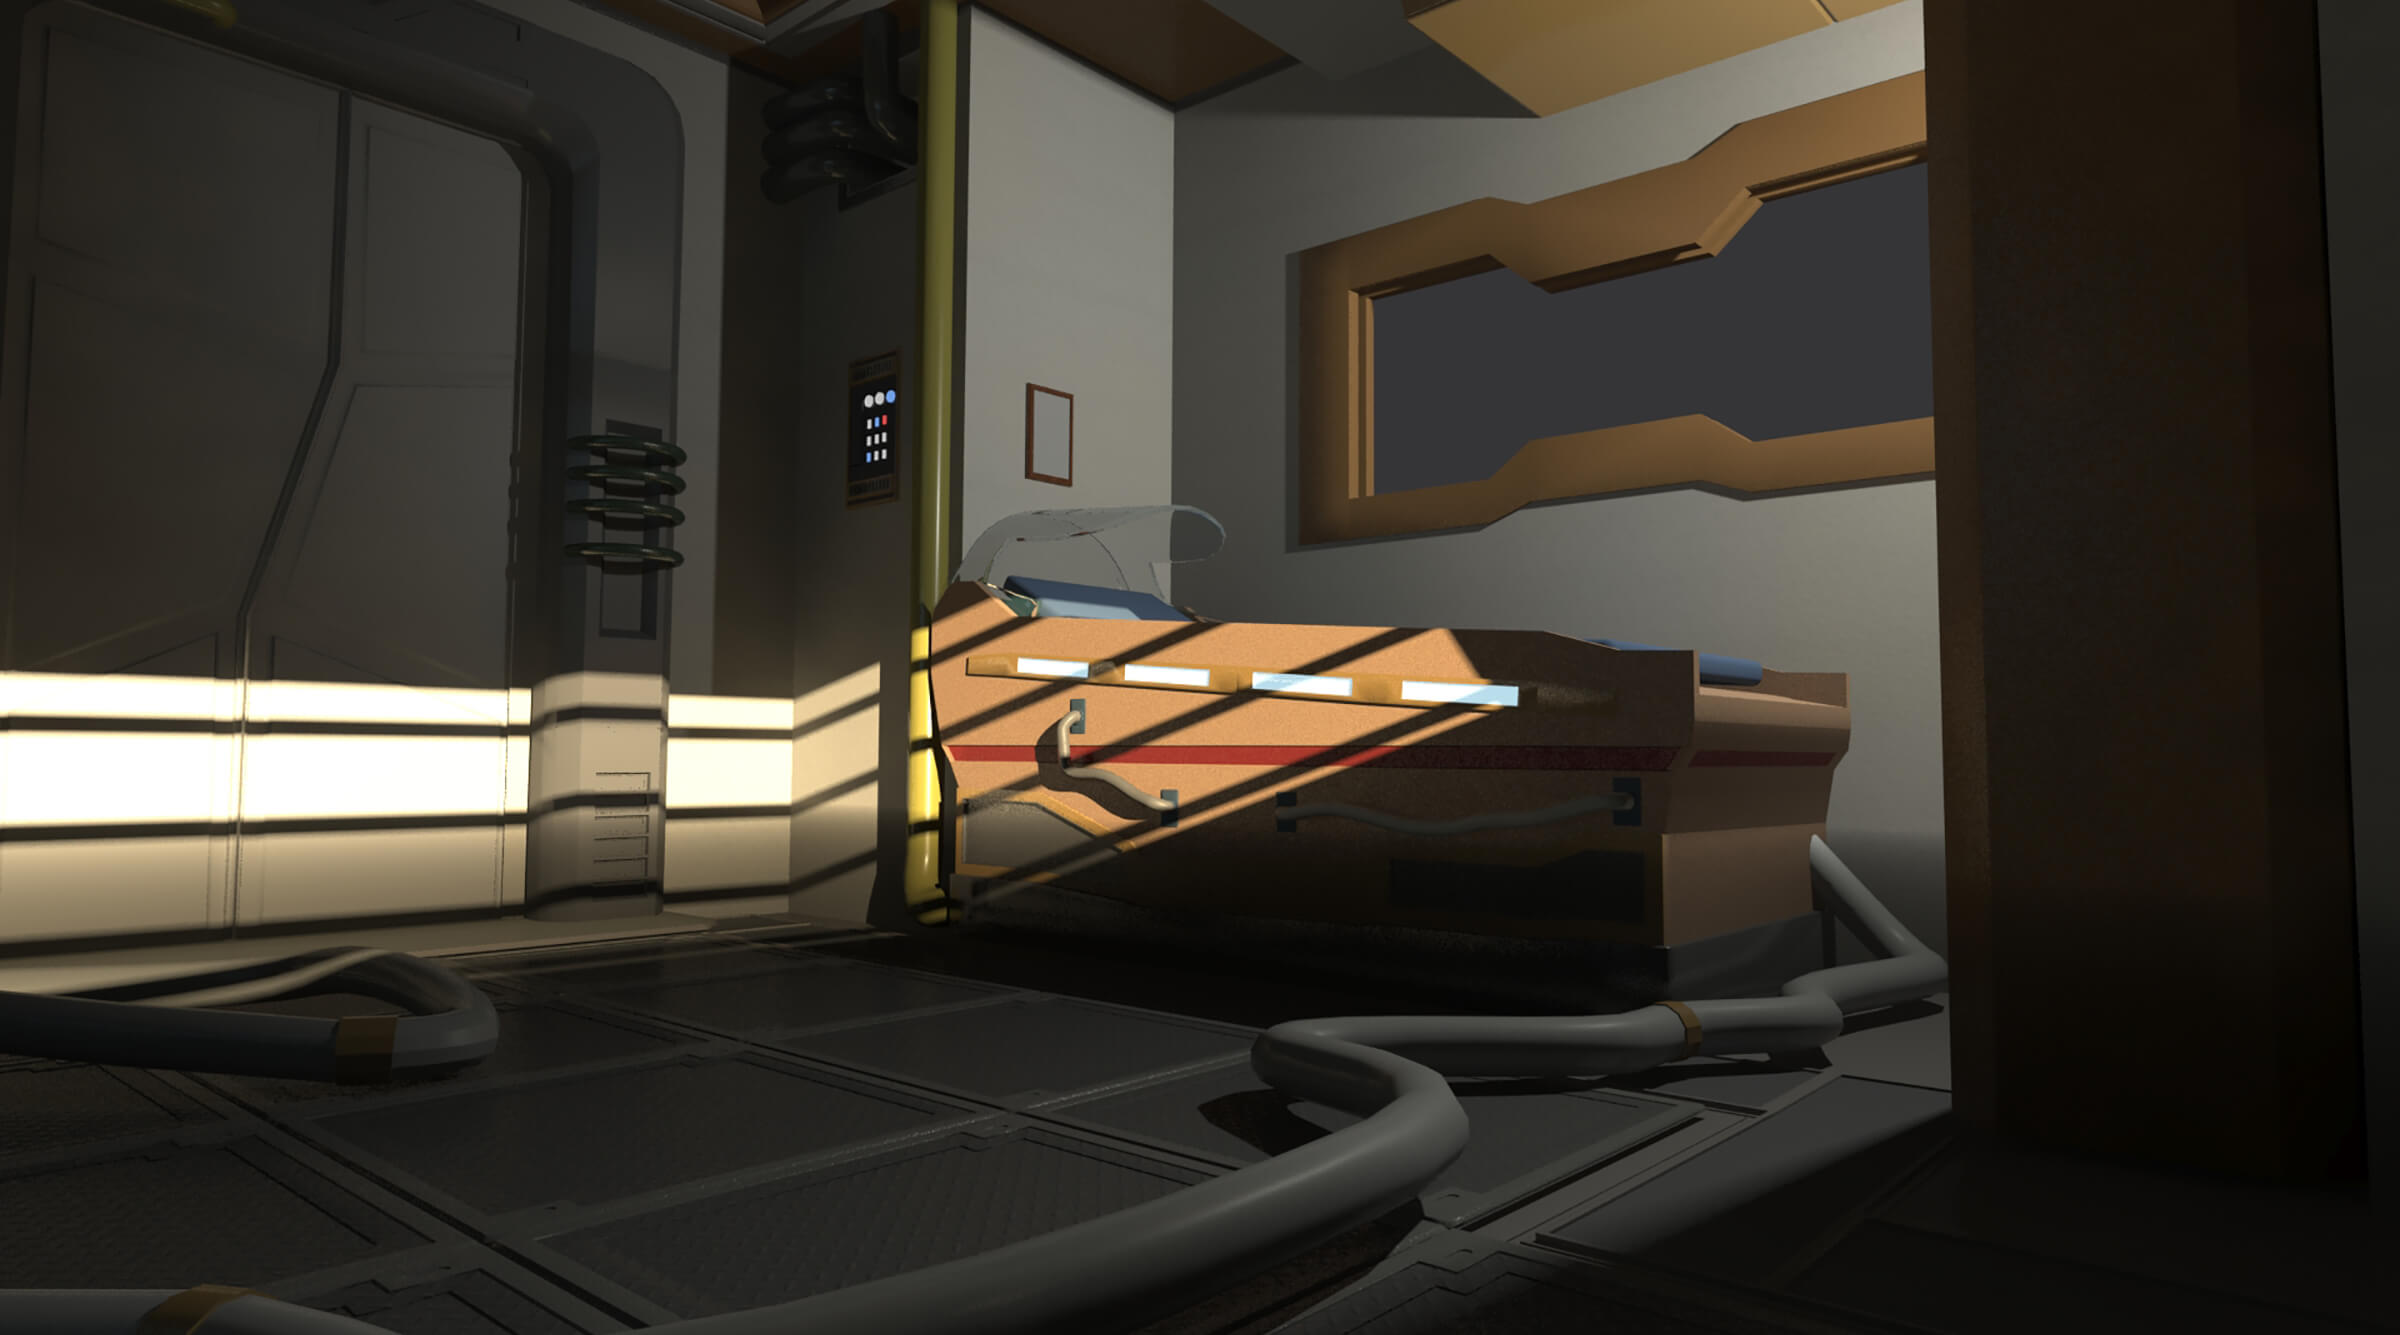 A dimly lit room decorated in a pristine, futuristic style with an elaborate sleeping apparatus seen to one side.